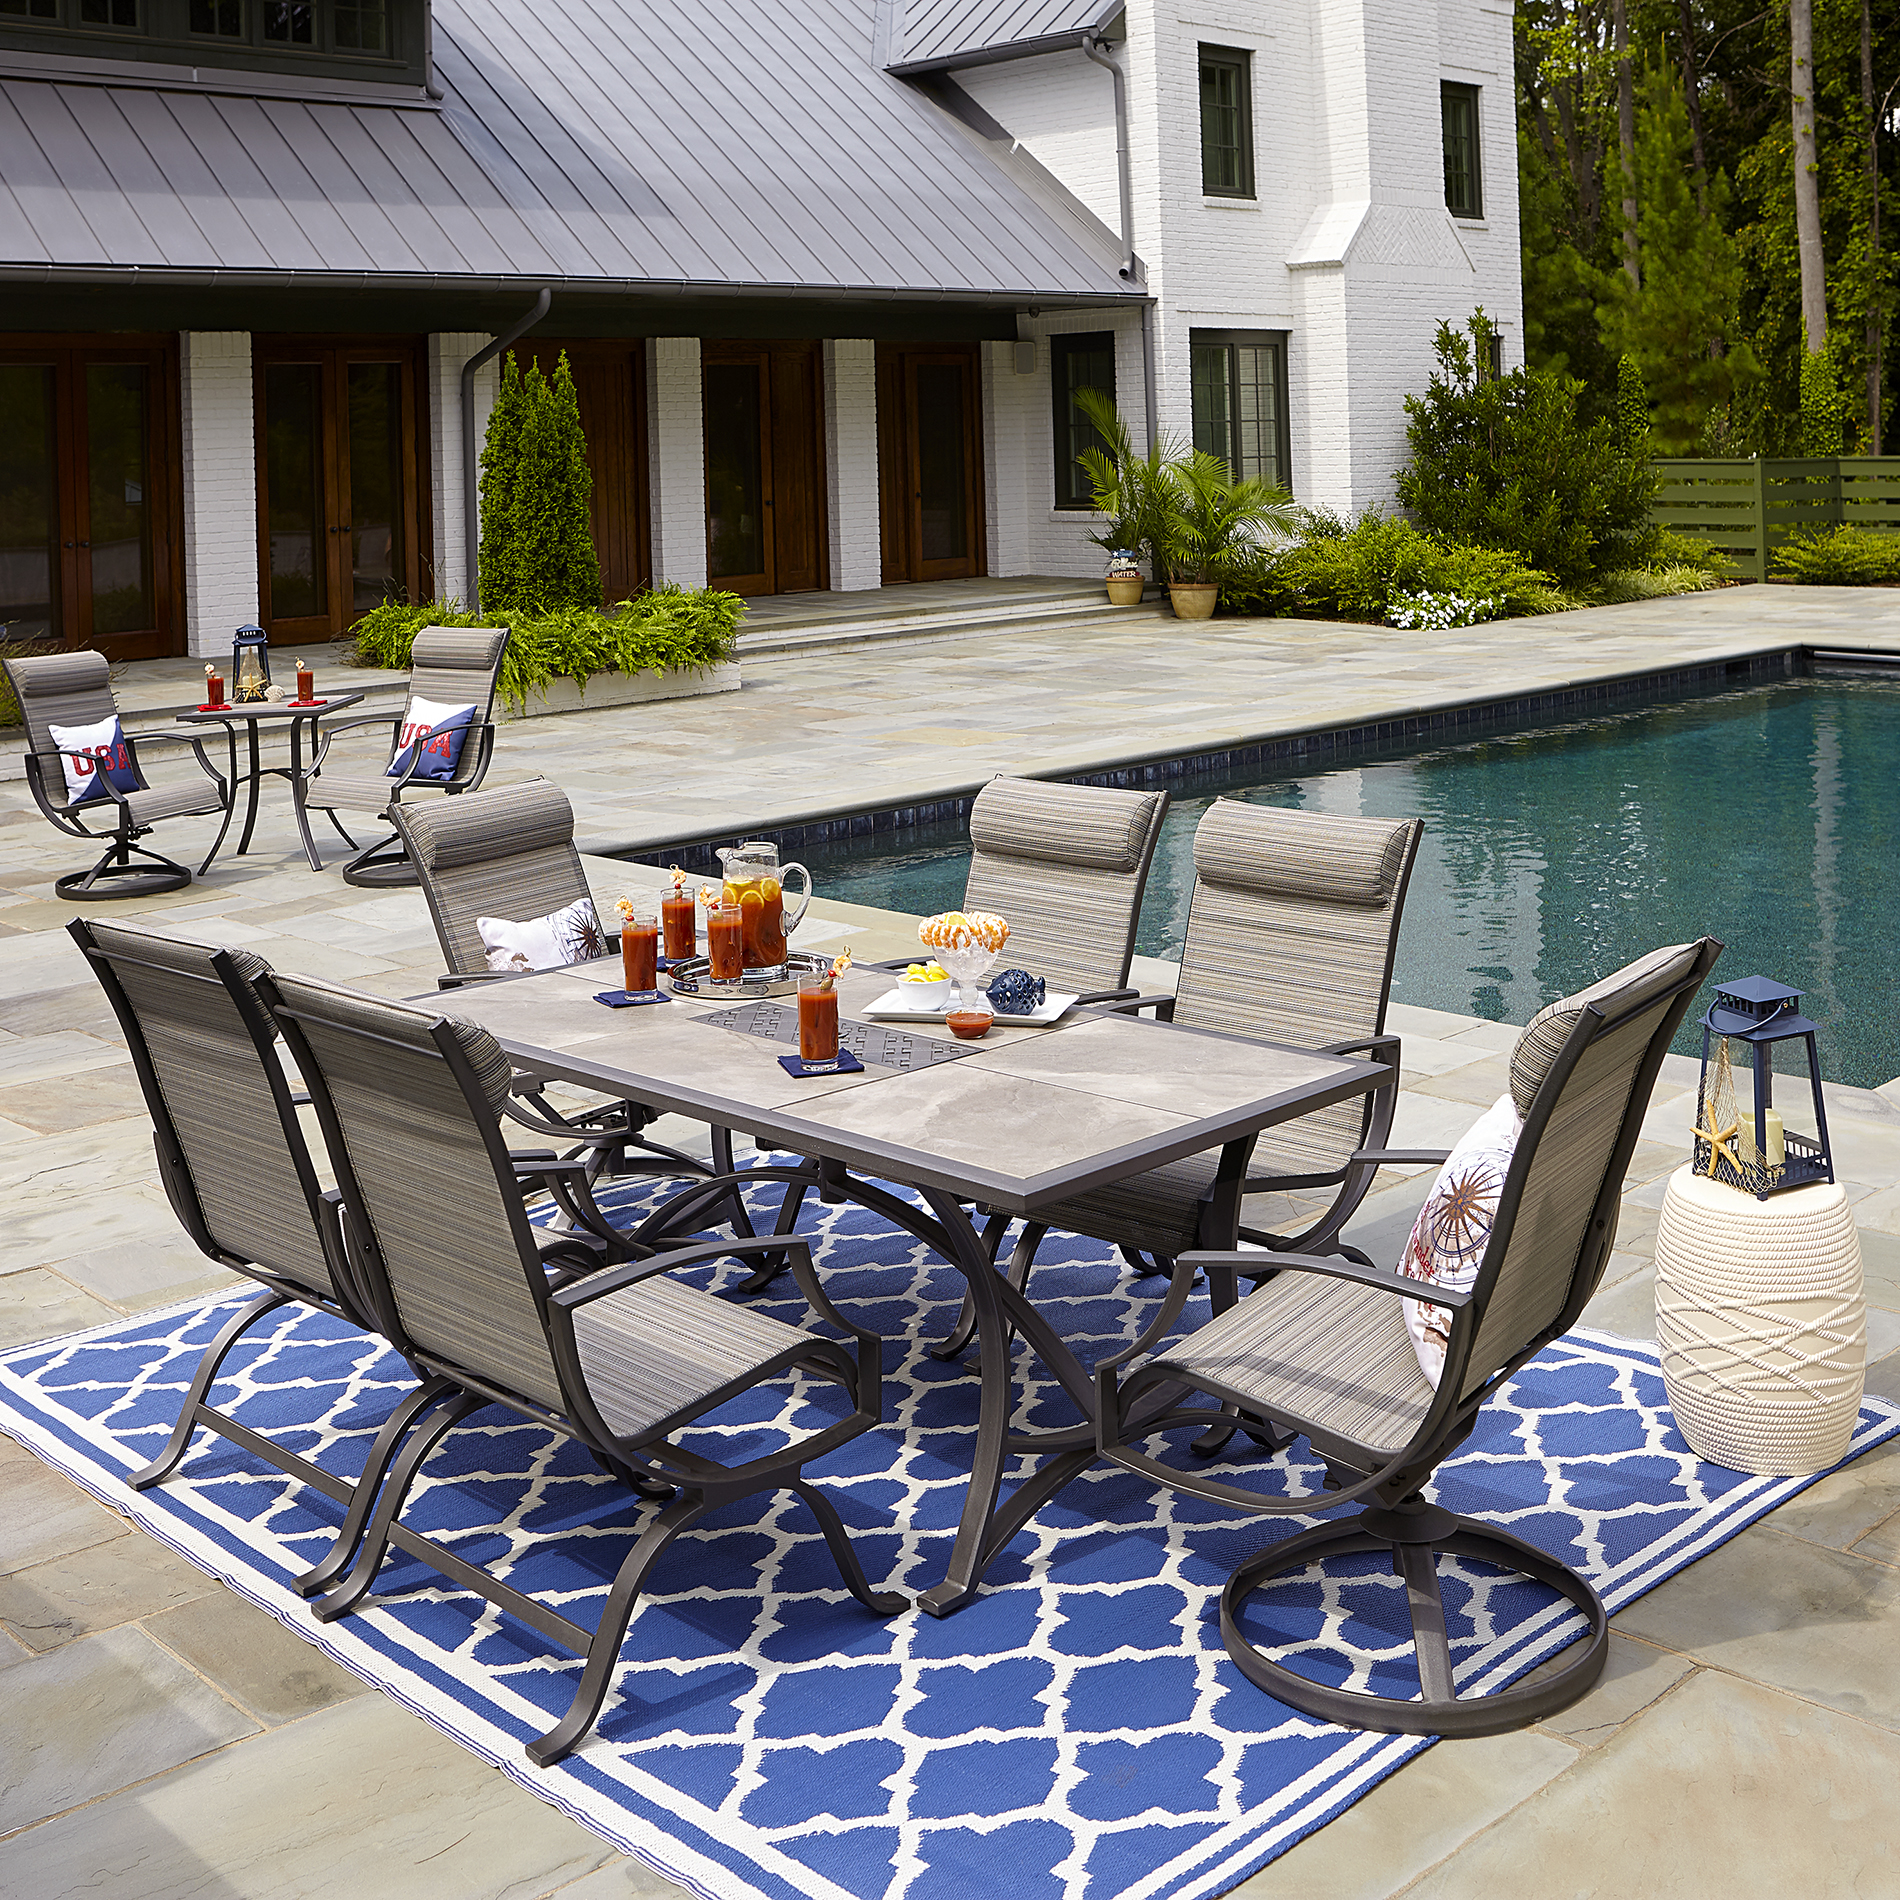 Sutton Rowe Fillmore 7 pc. Sling Outdoor Dining Set